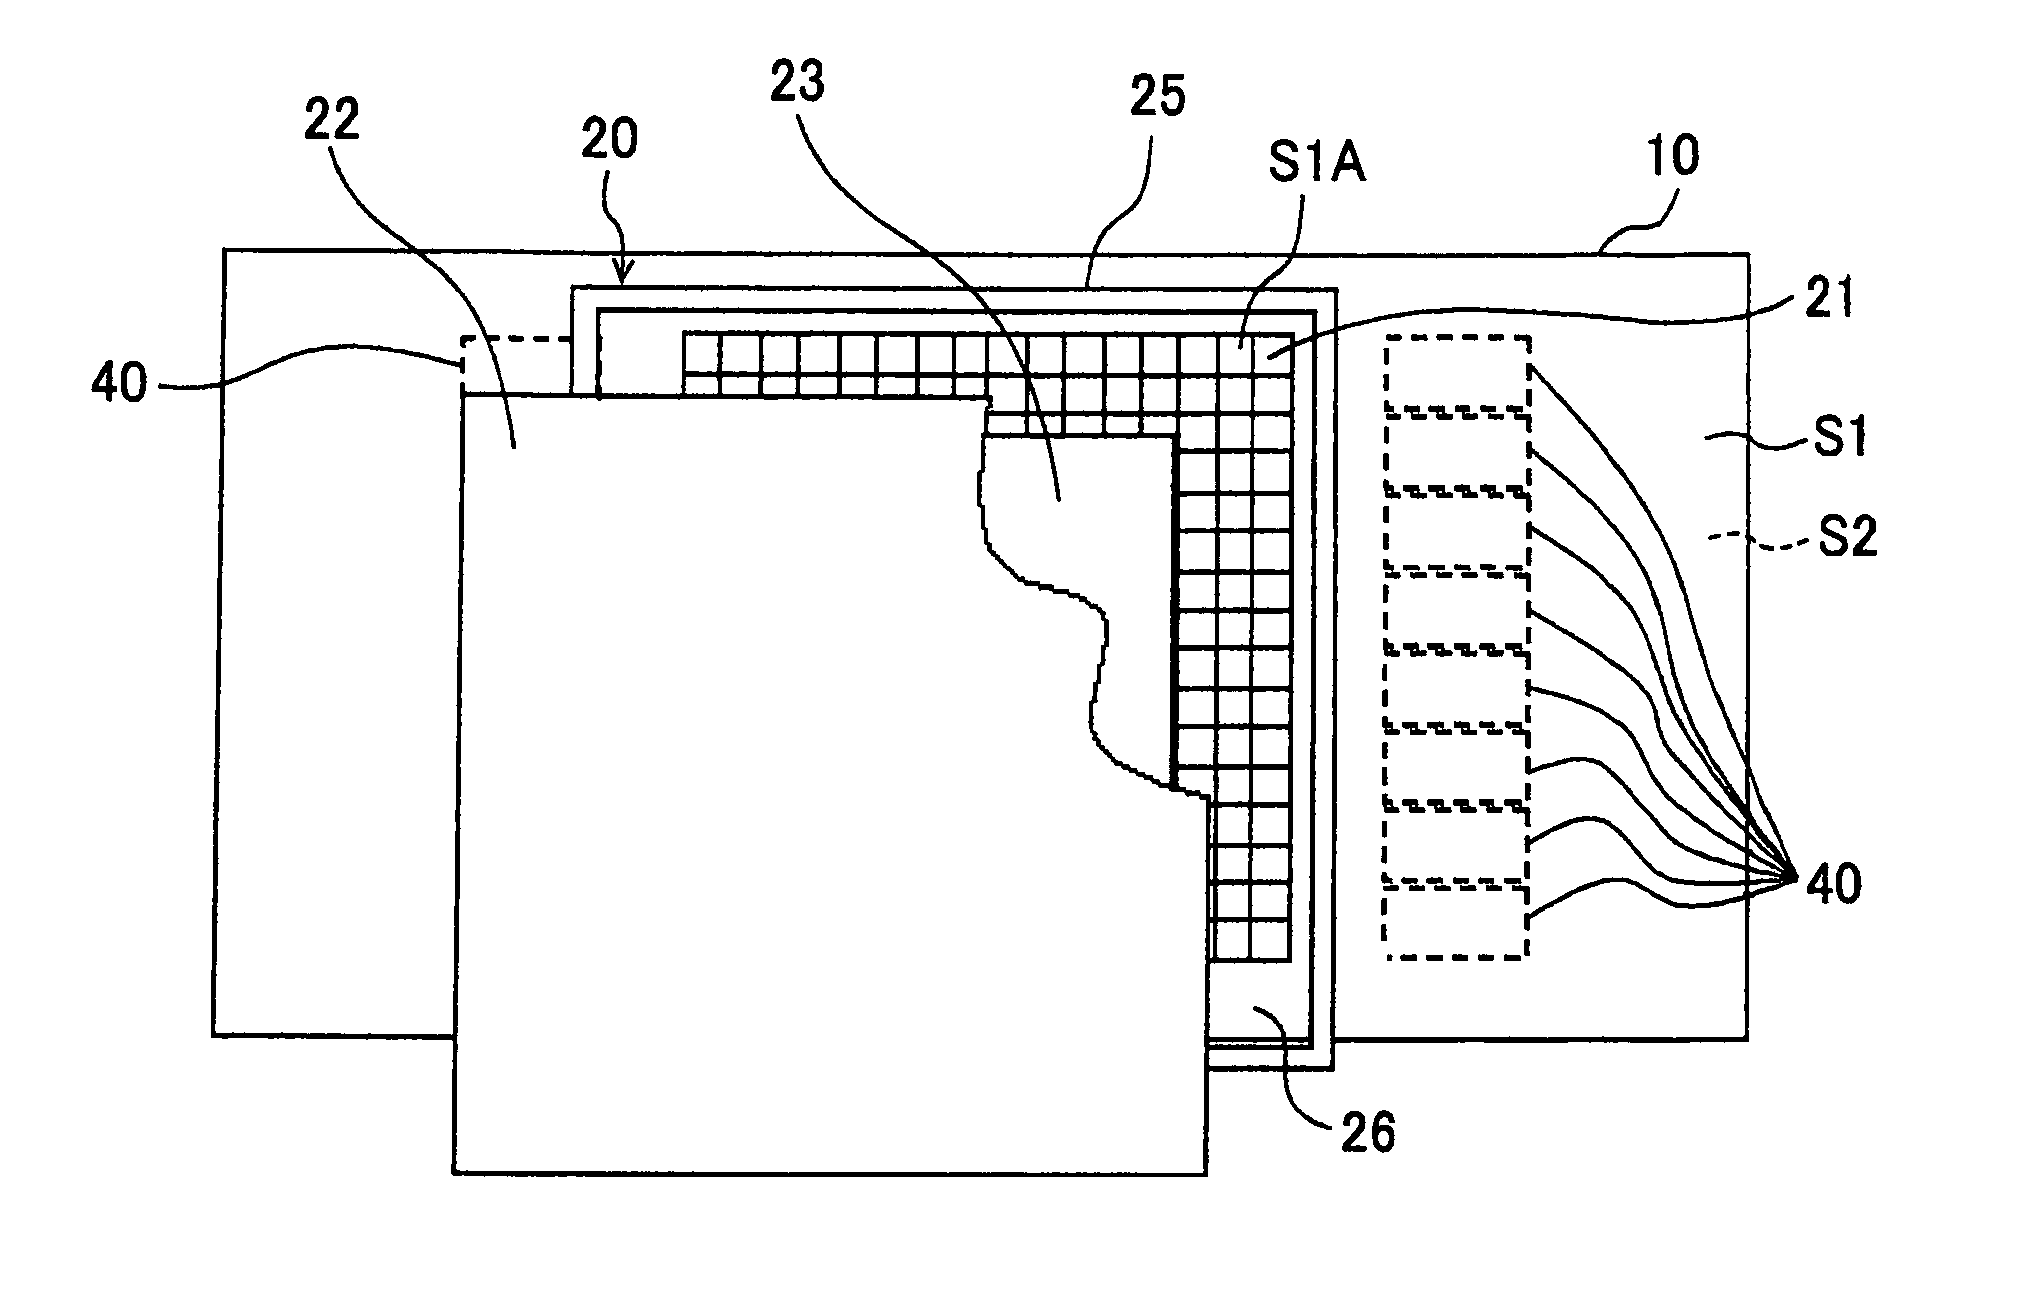 Dosimetry device for charged particle radiation